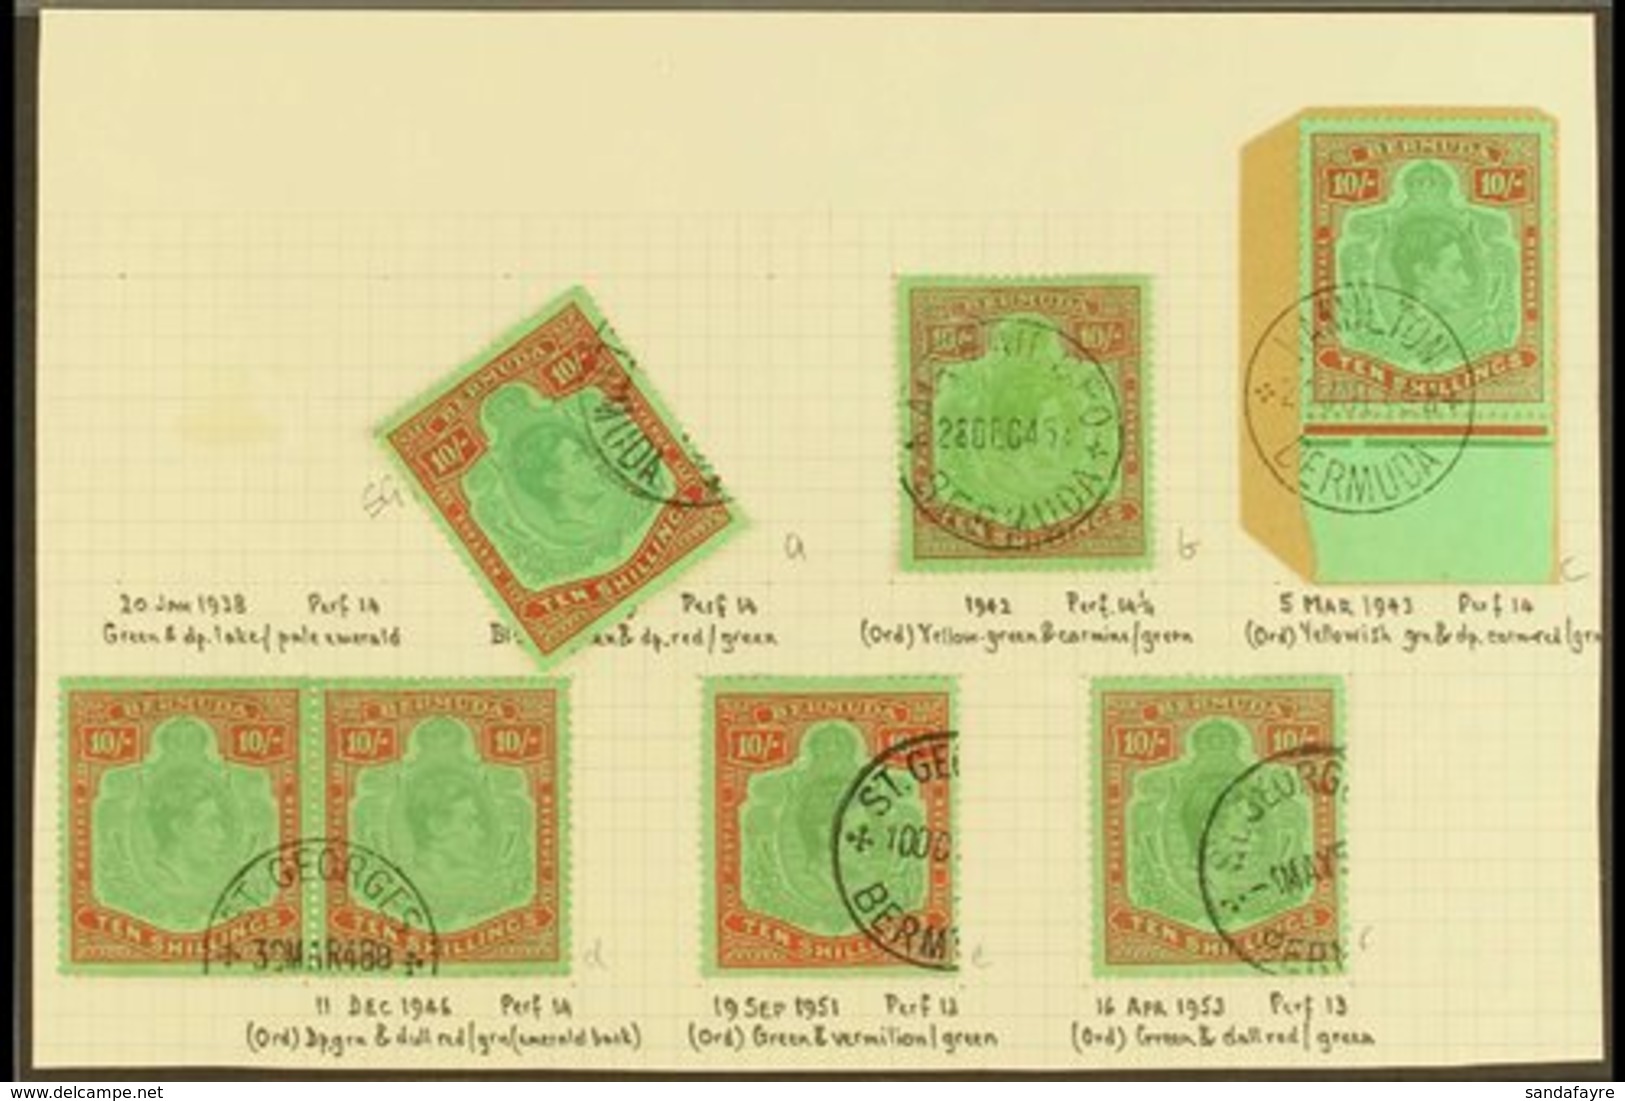 1938-53 10 SHILLING USED KEY PLATE SELECTION.  An All Different, Specialized Shade & Perf Collection Of Fine Cds Used "k - Bermuda